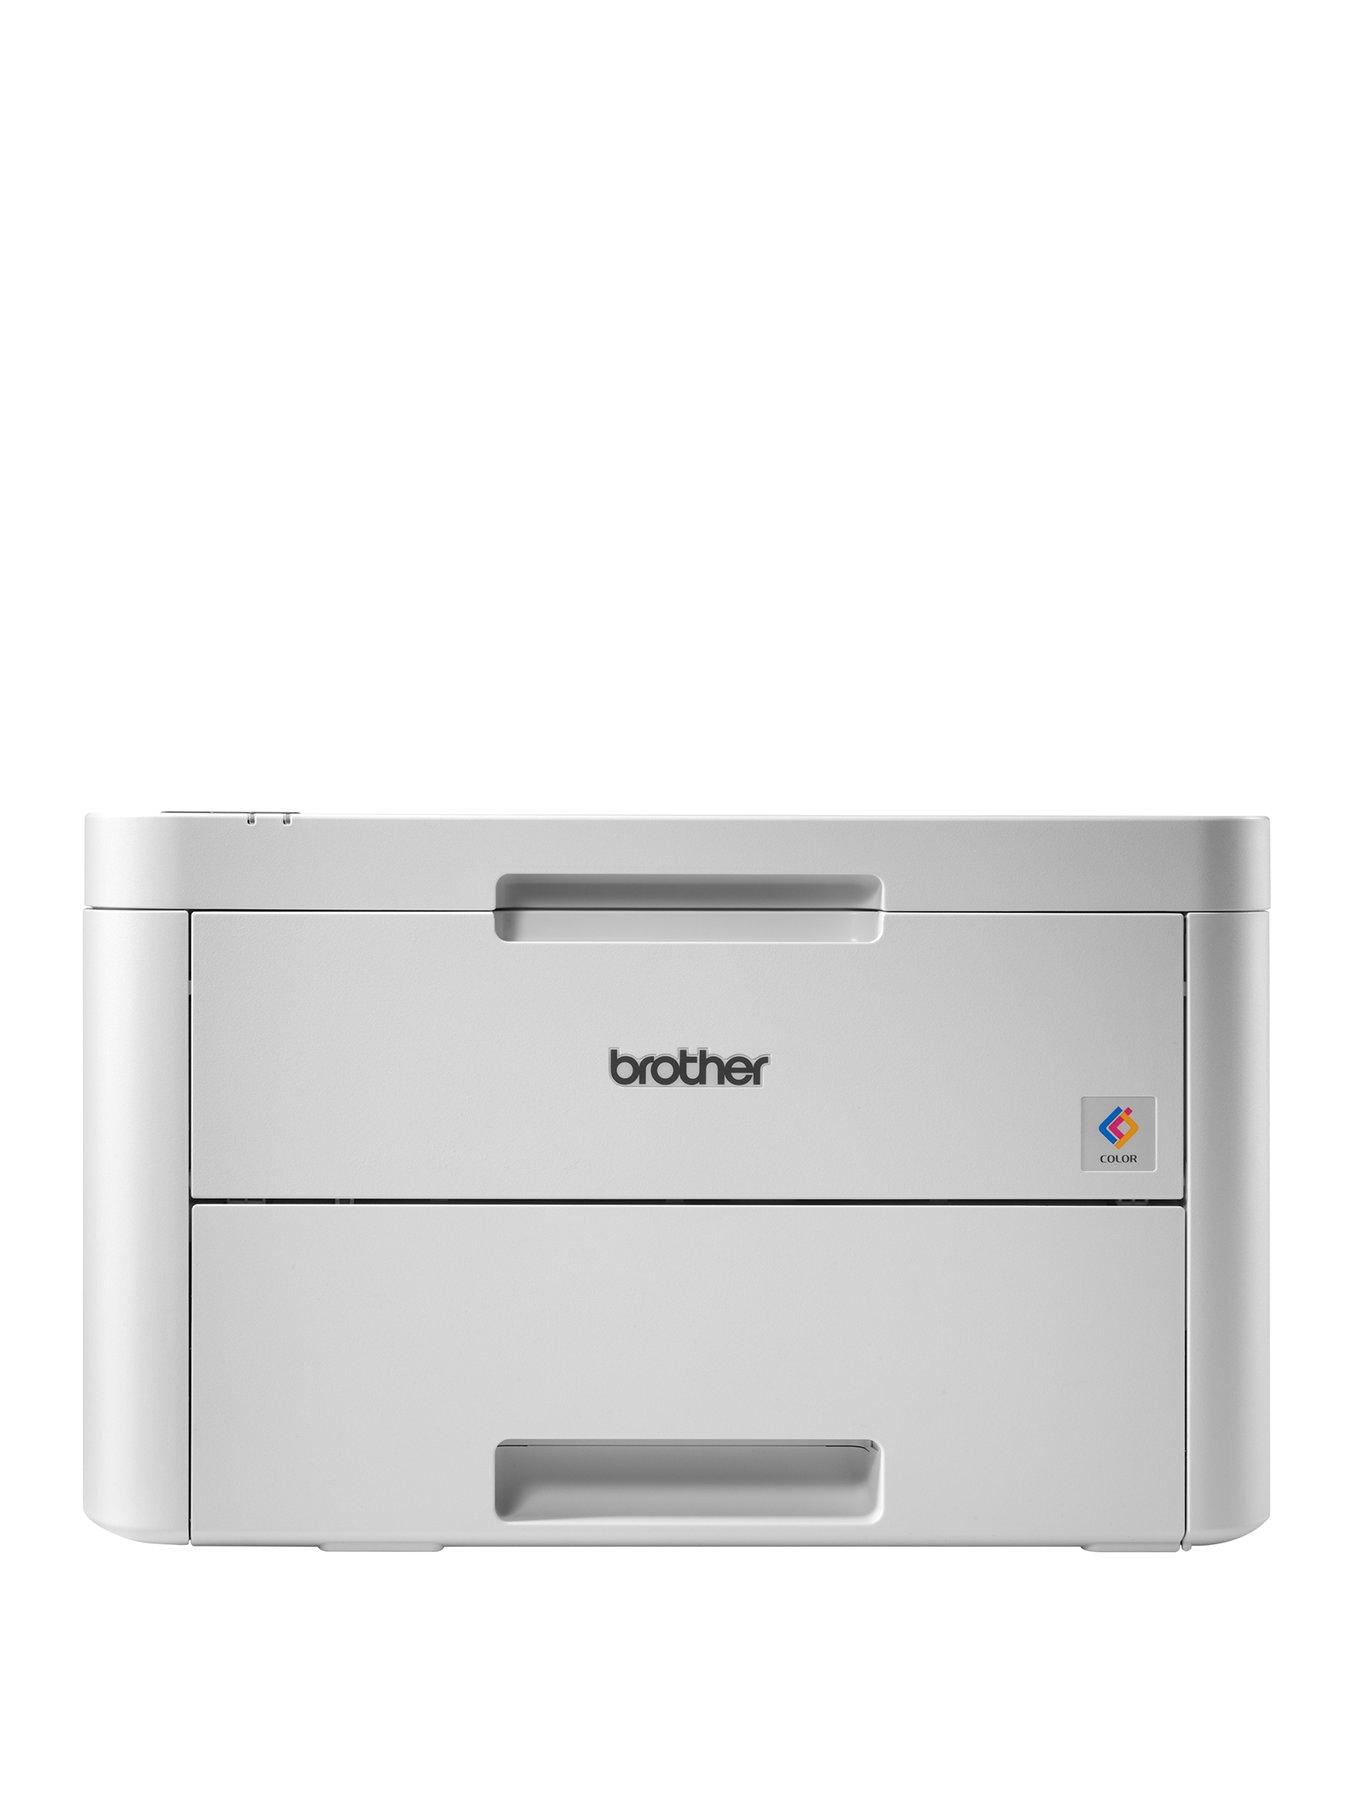 Brother HL-L3210CW Colour Wireless LED Printer | Very